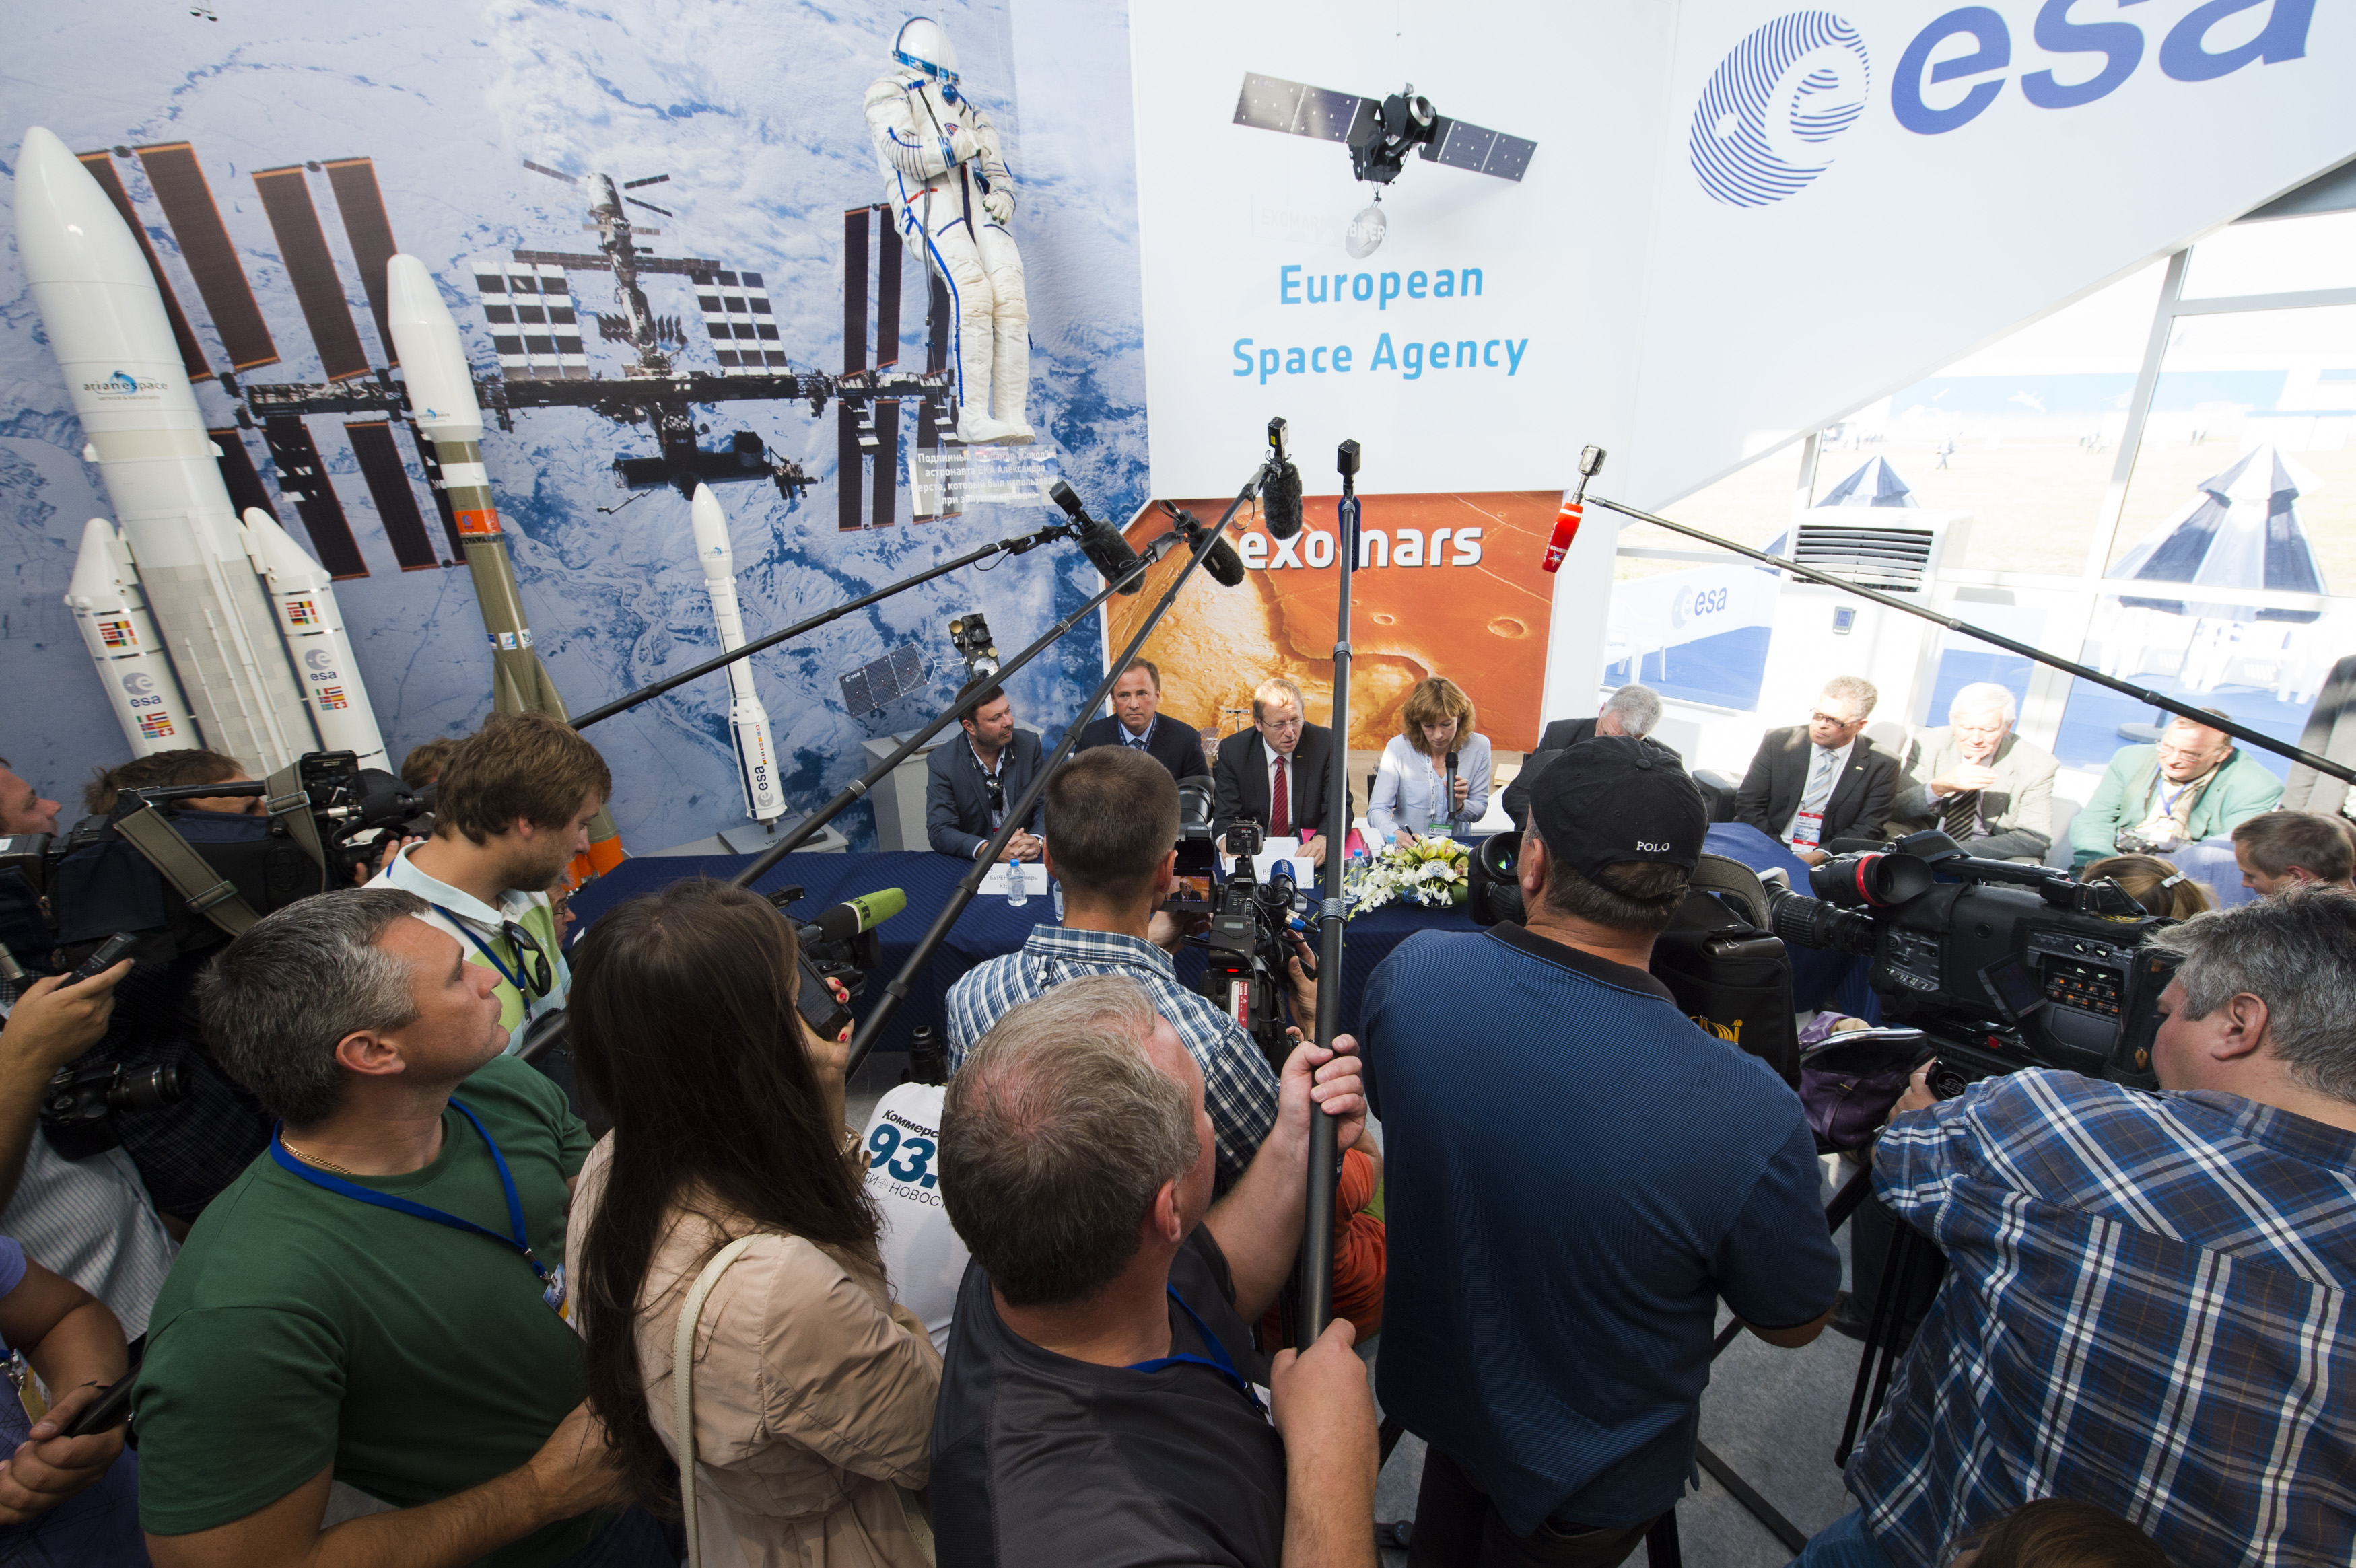 Press_conference_at_the_ESA_chalet.jpg